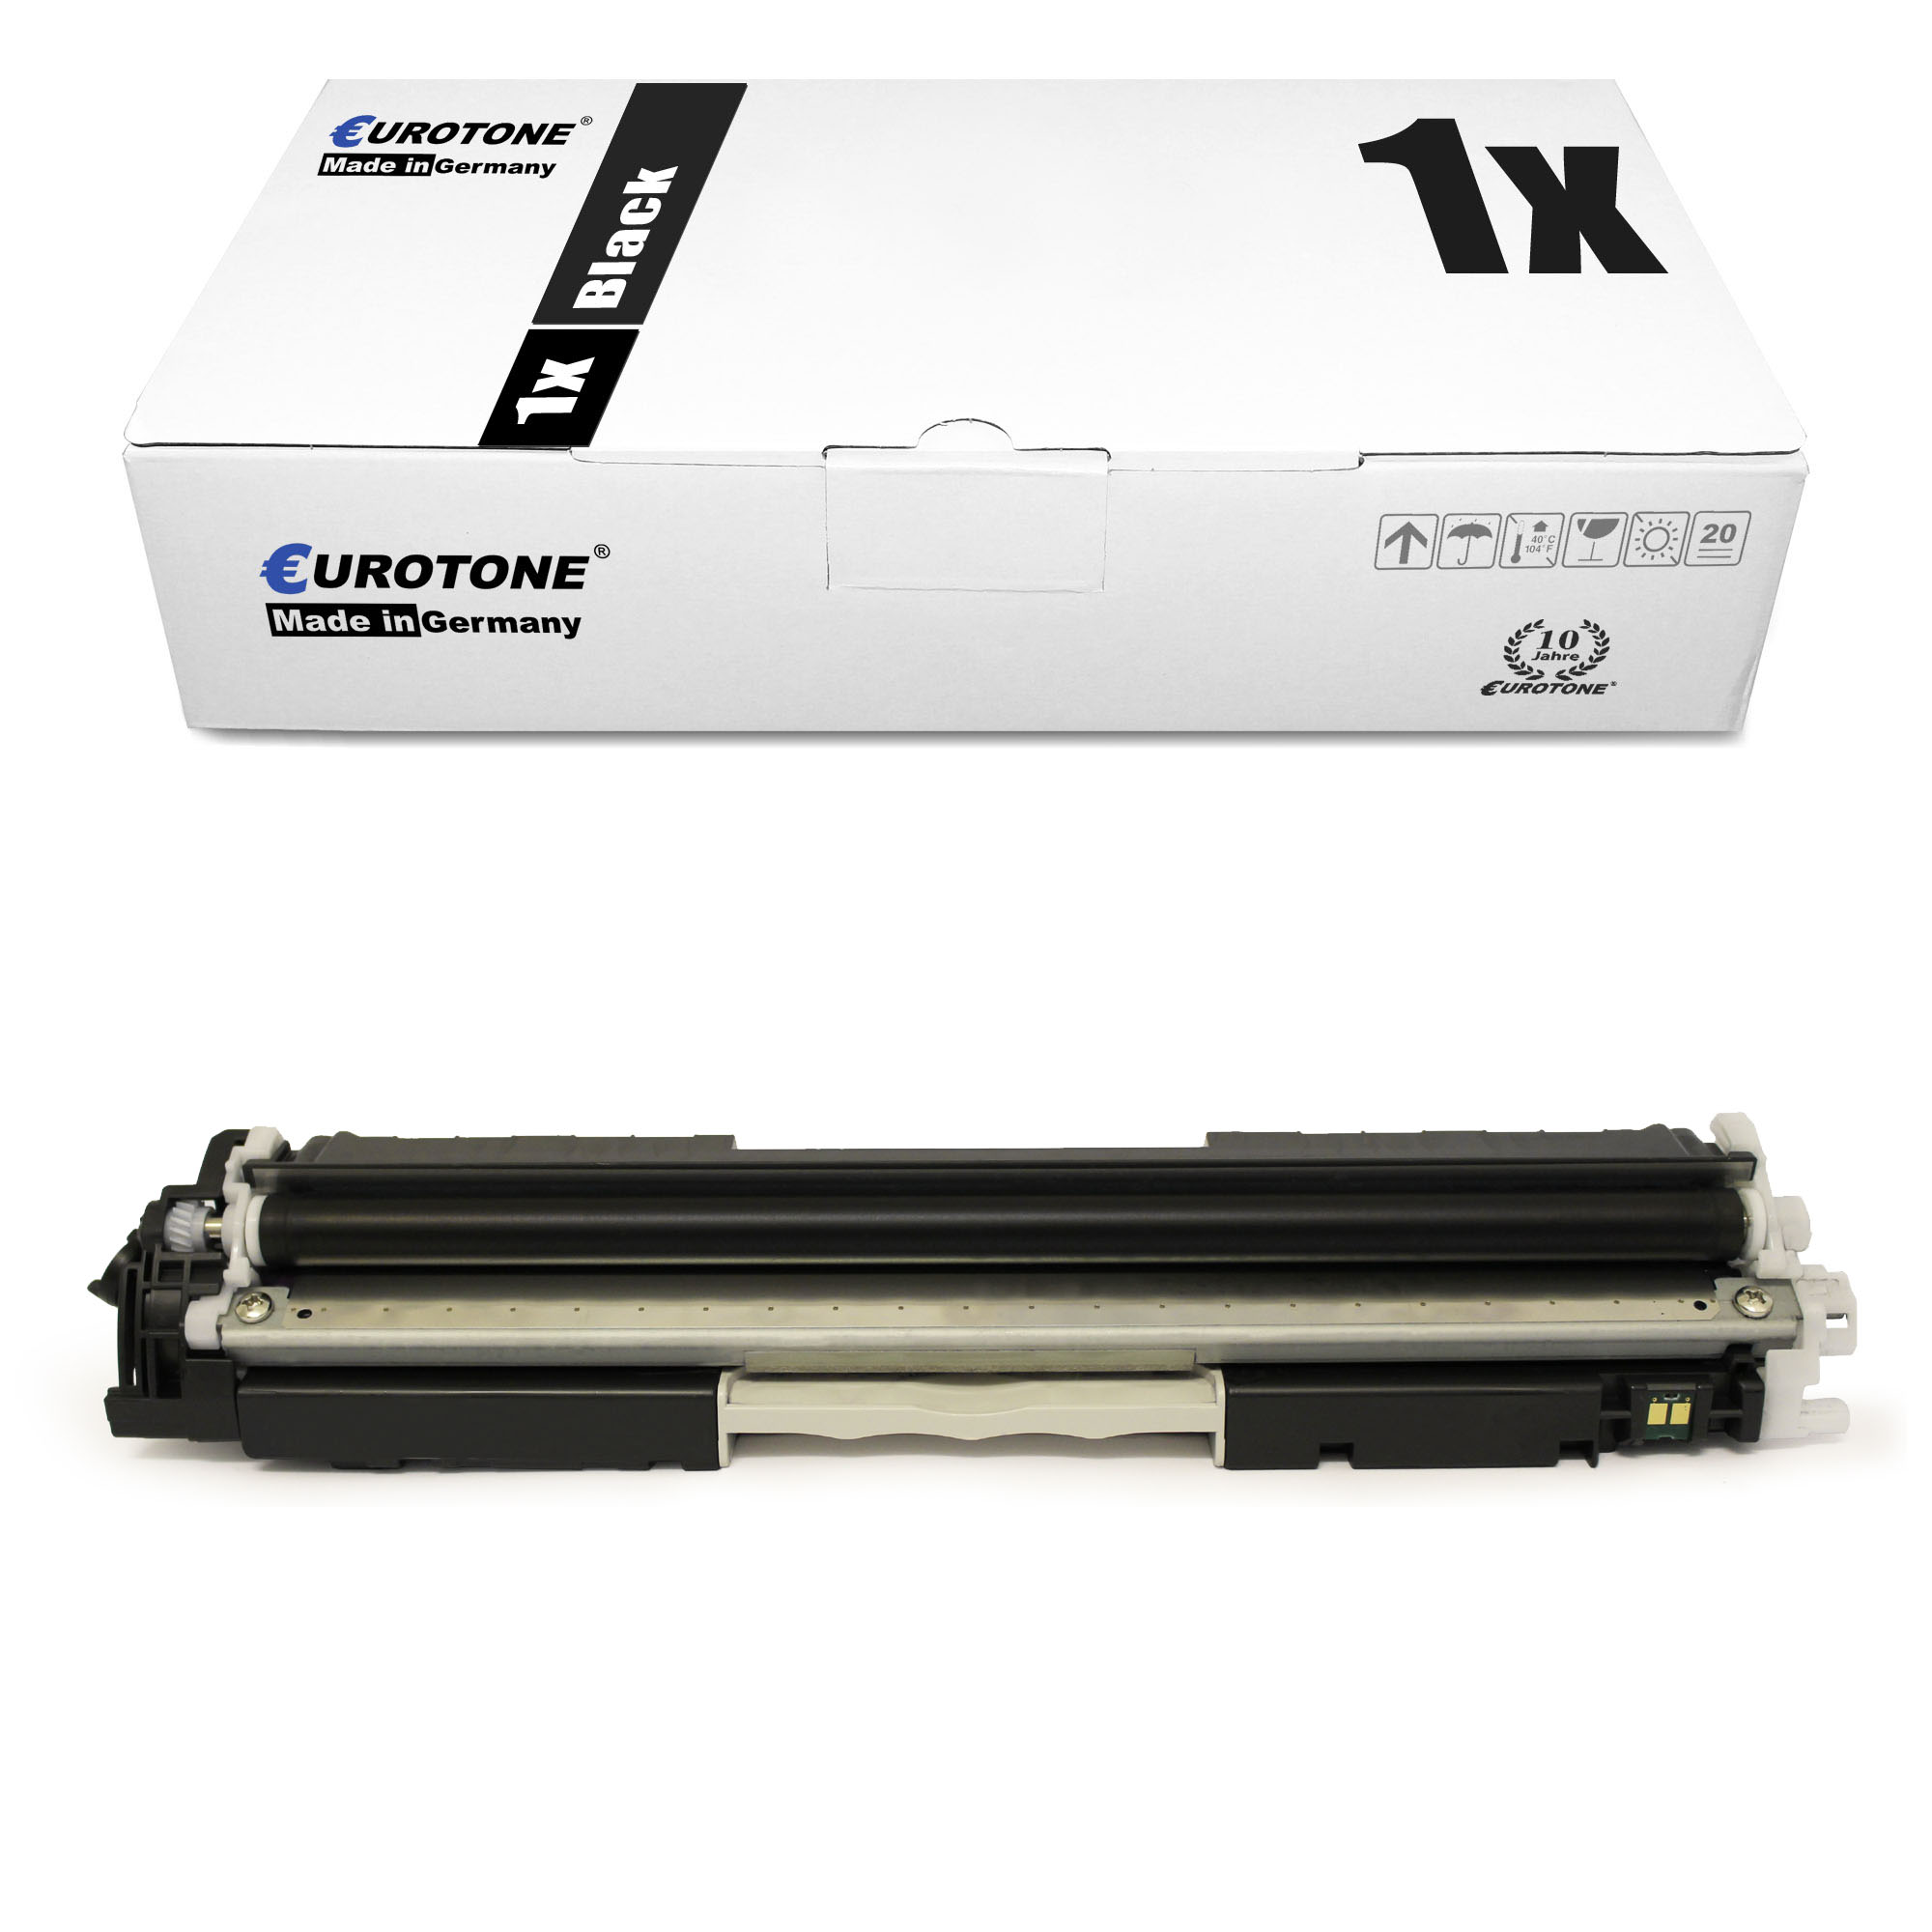 1x Toner for HP LaserJet CP 1025 Color NW CE310A 126A 4059844183307 | eBay